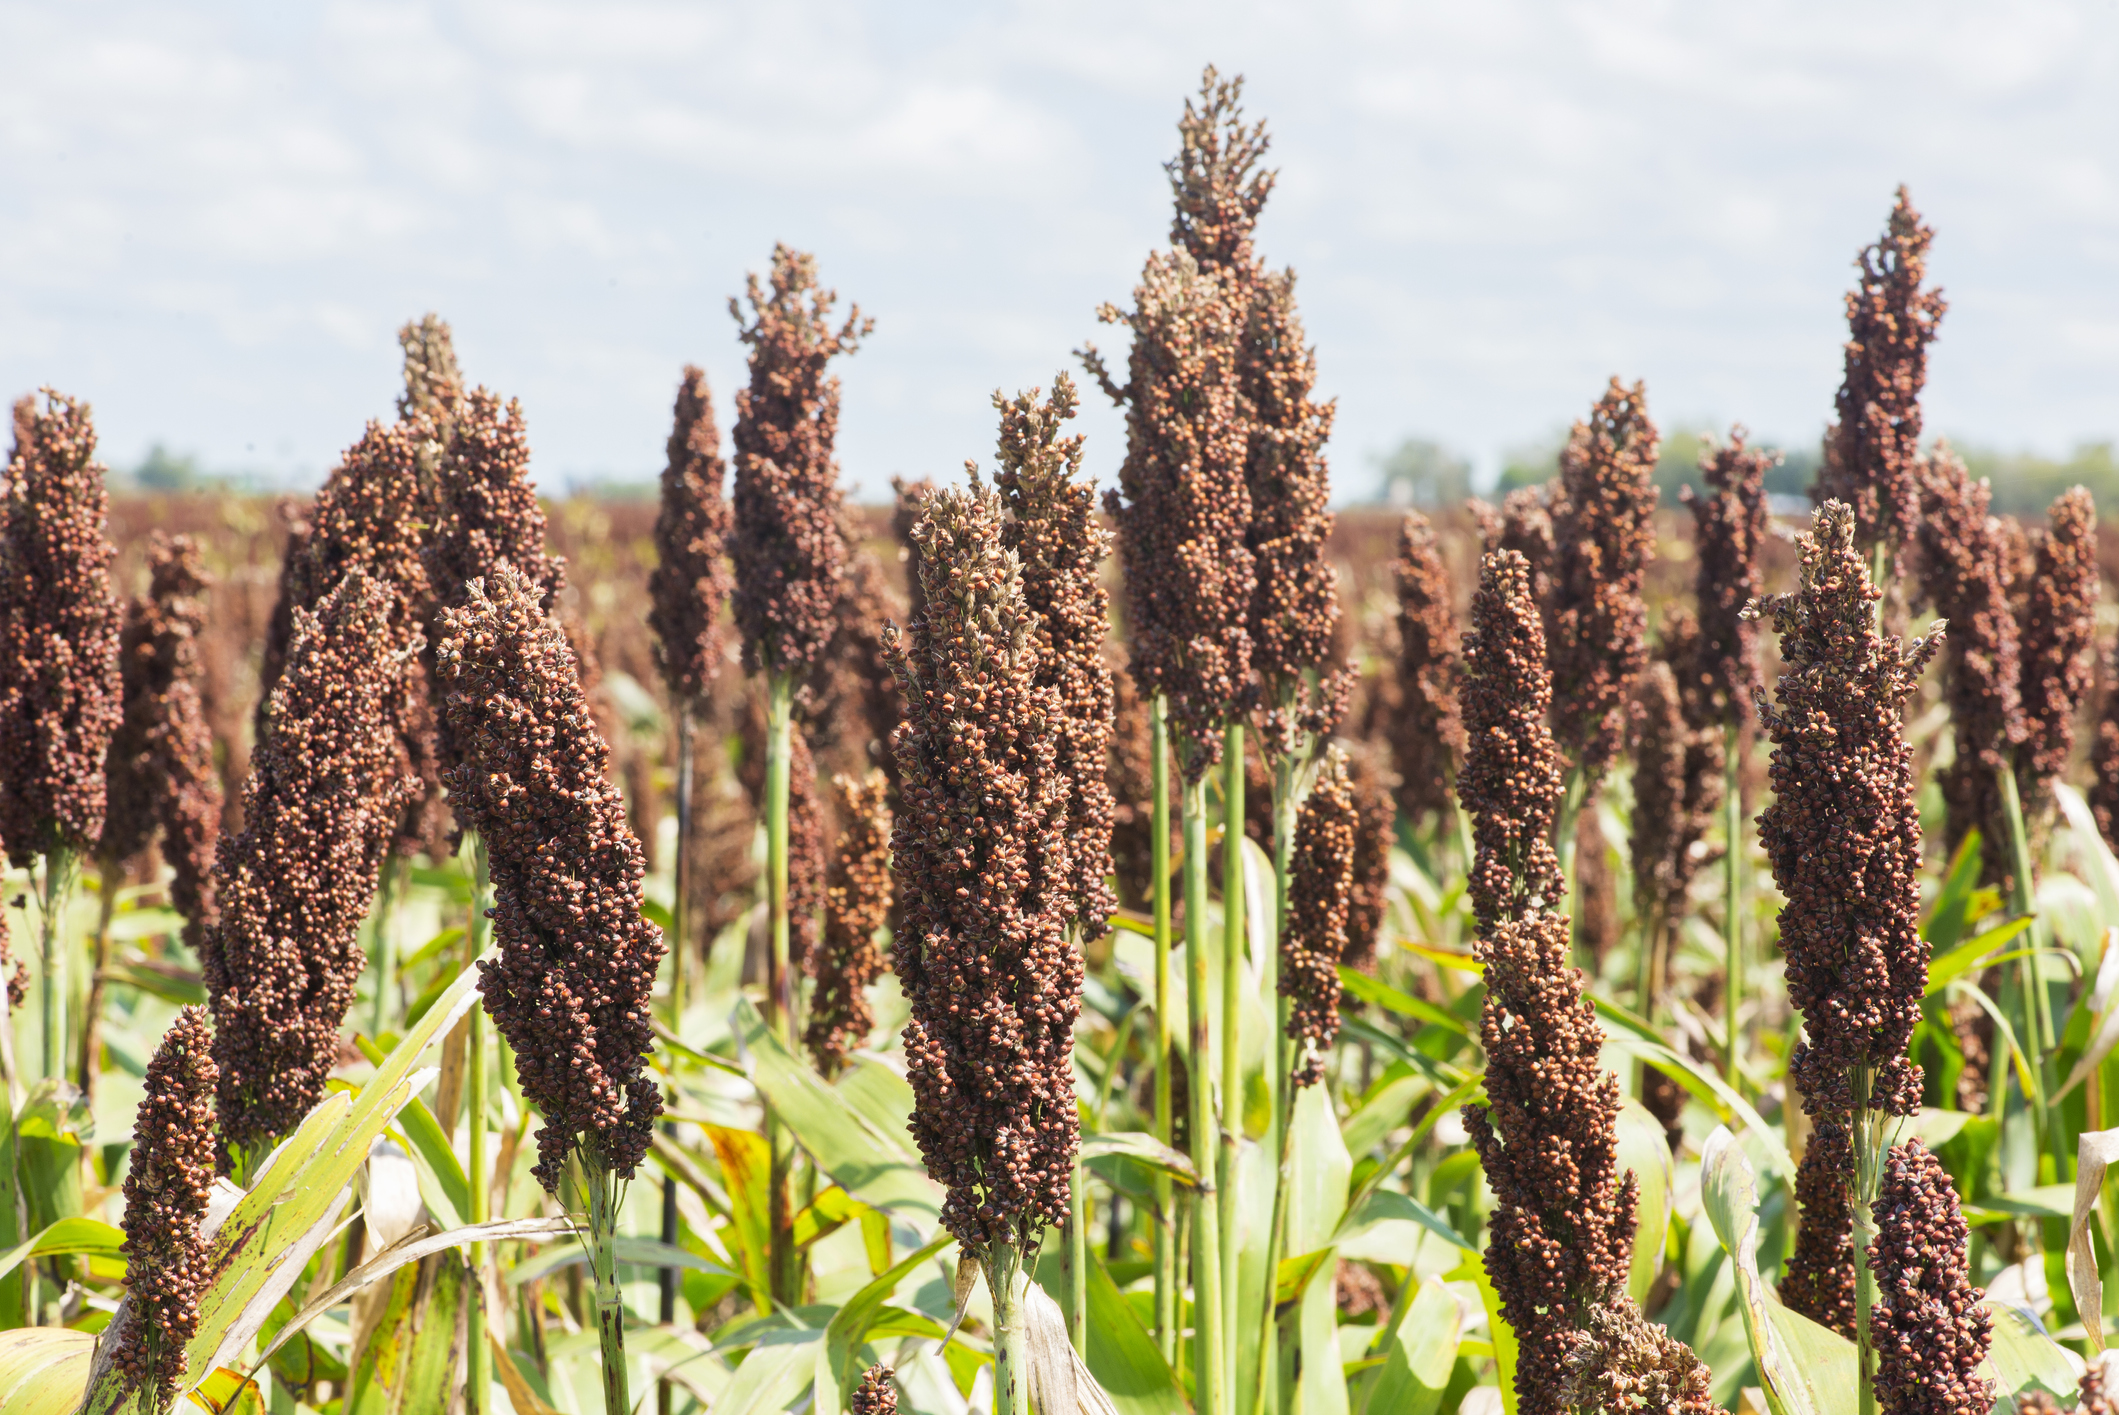 Prussic acid might develop, or nitrates can accumulate in sorghum forages due to cool temperatures and other fall stressors.